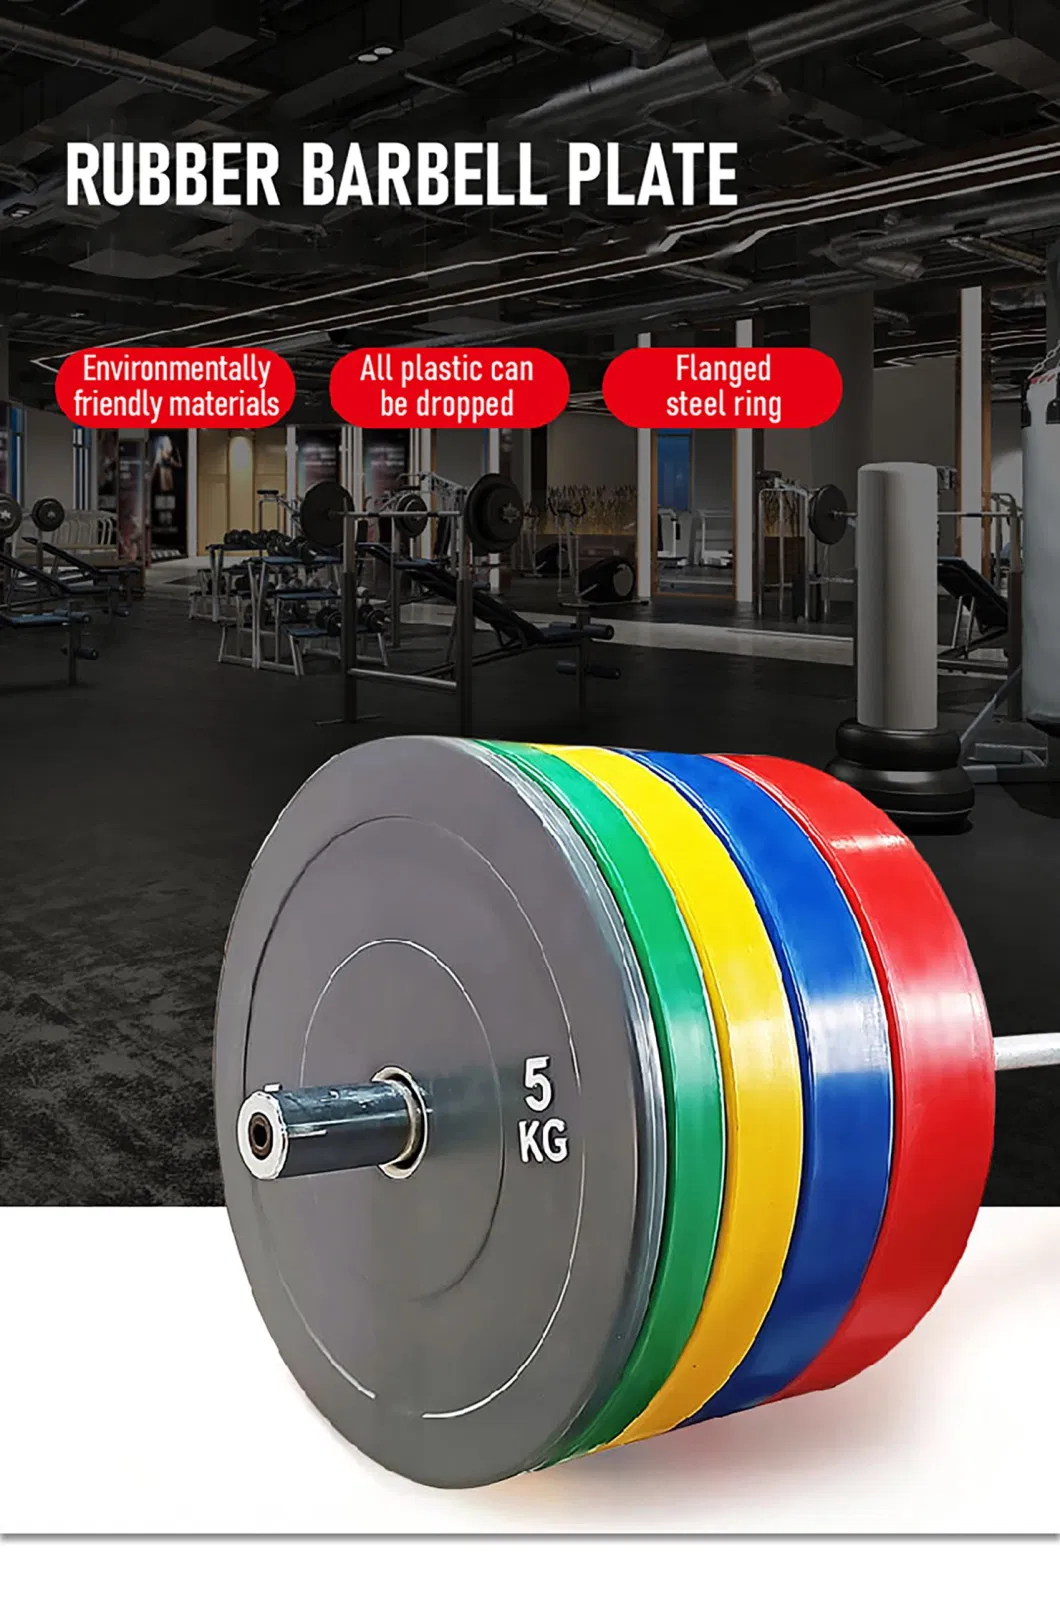 Hot Sell Weight Barbell Plate Weight Plate Color Rubber Bumper Plates for Gym Equipment Training